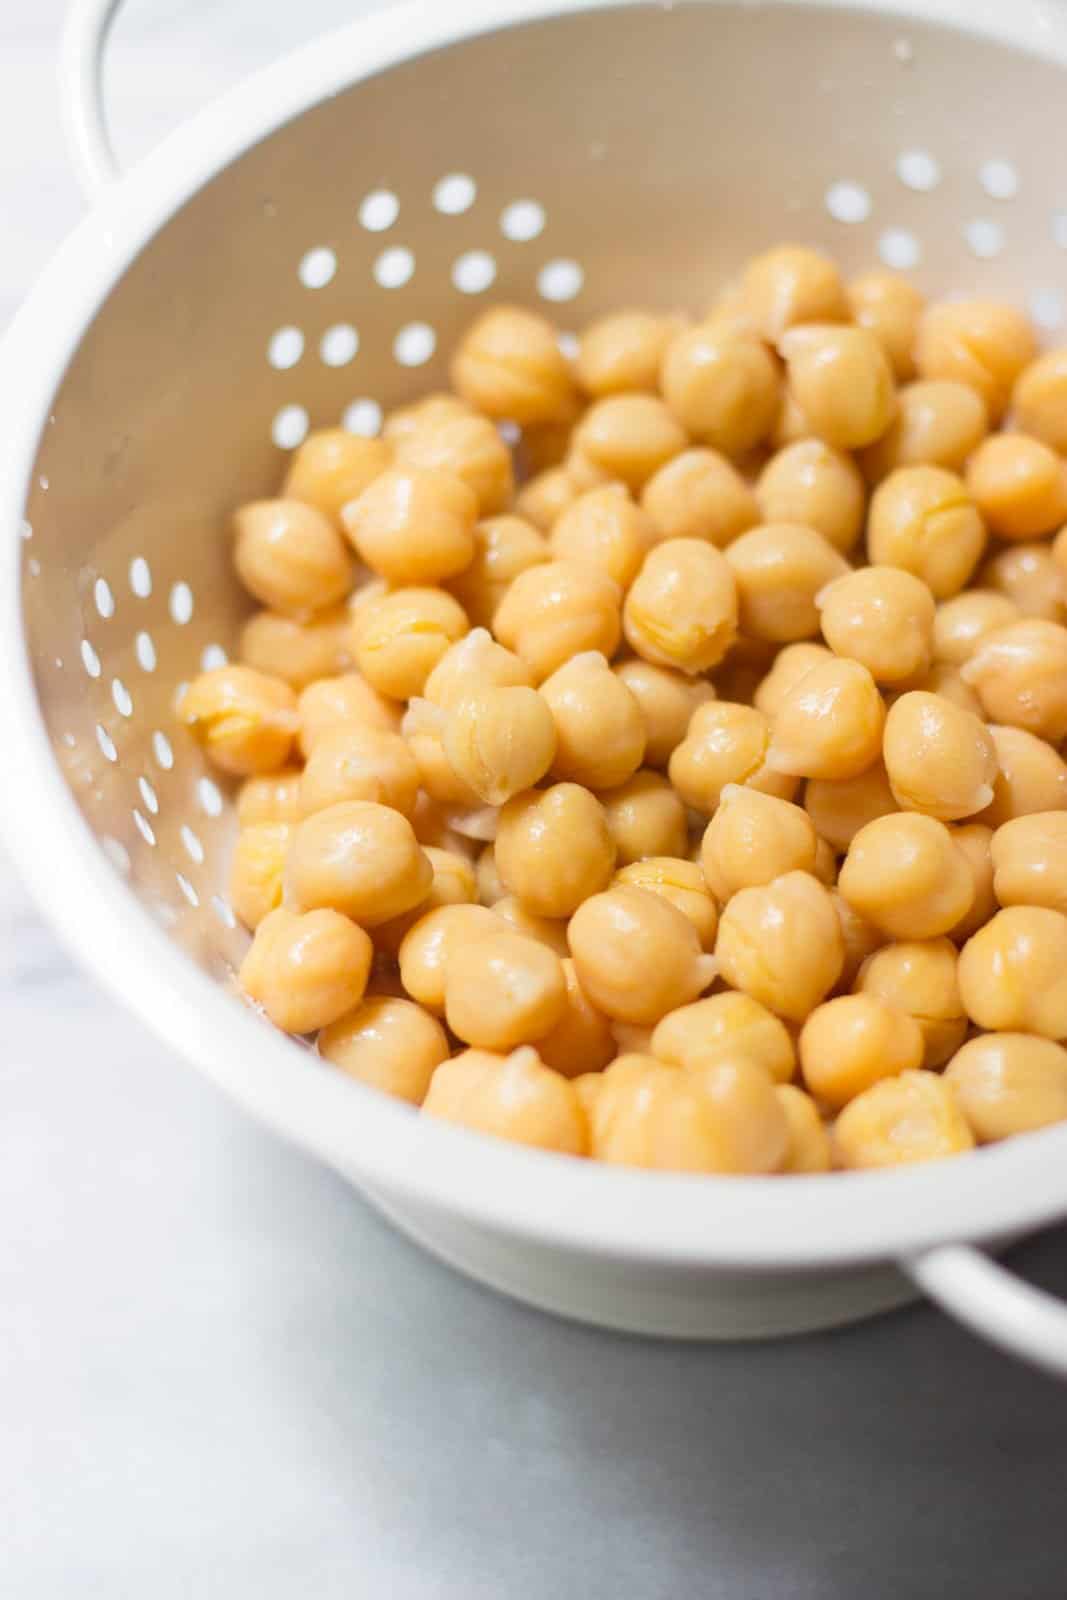 A colander filled with chickpeas